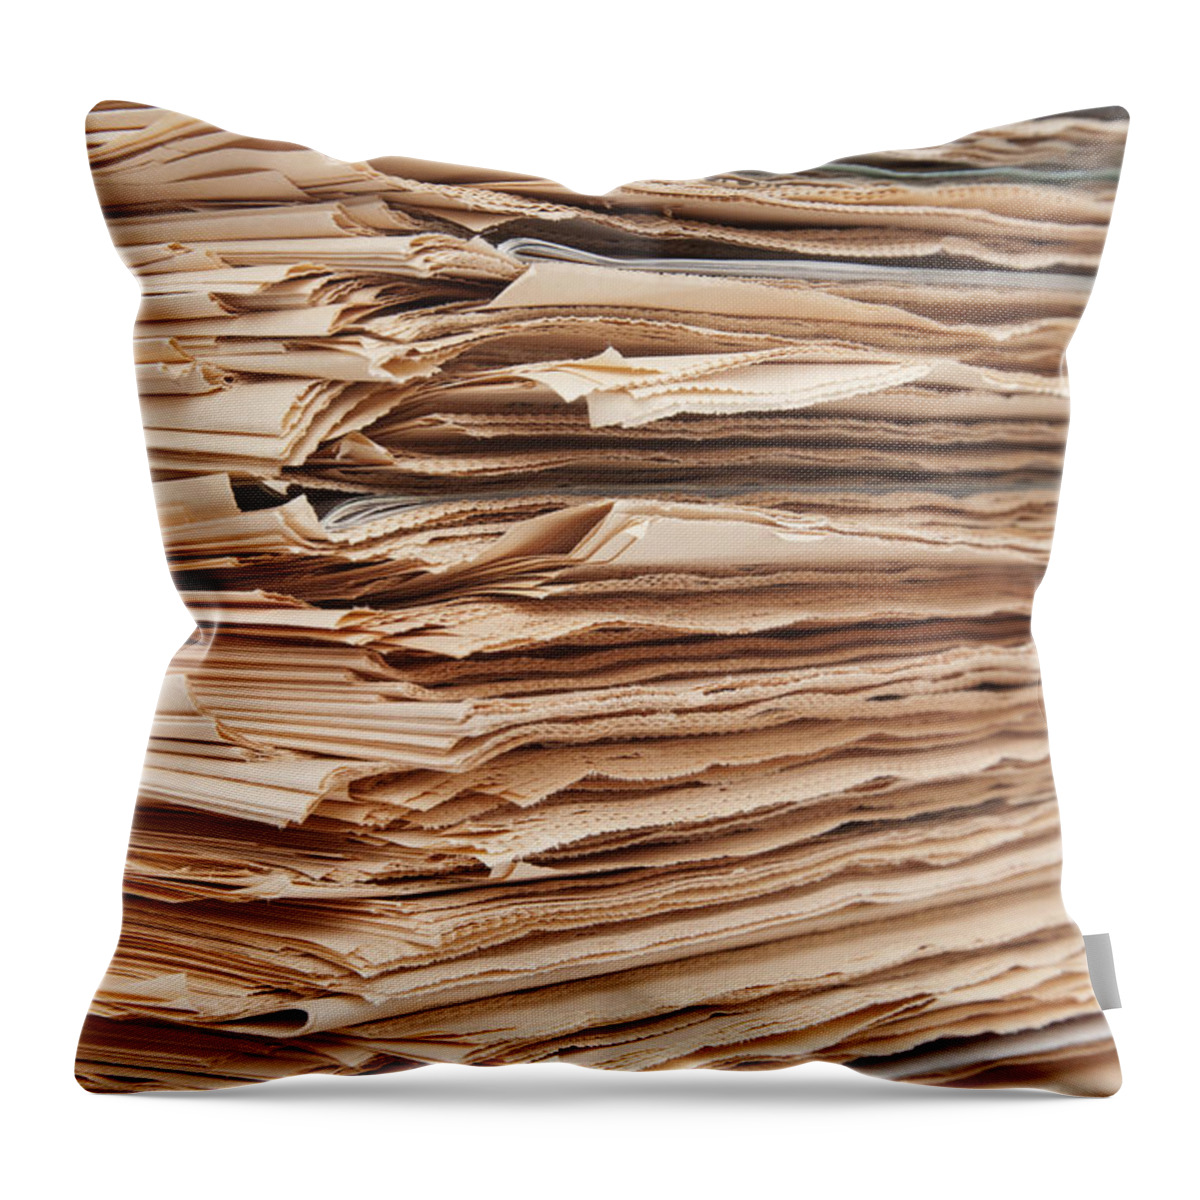 Newspaper Throw Pillow featuring the photograph Newspaper Stack #3 by Chevy Fleet